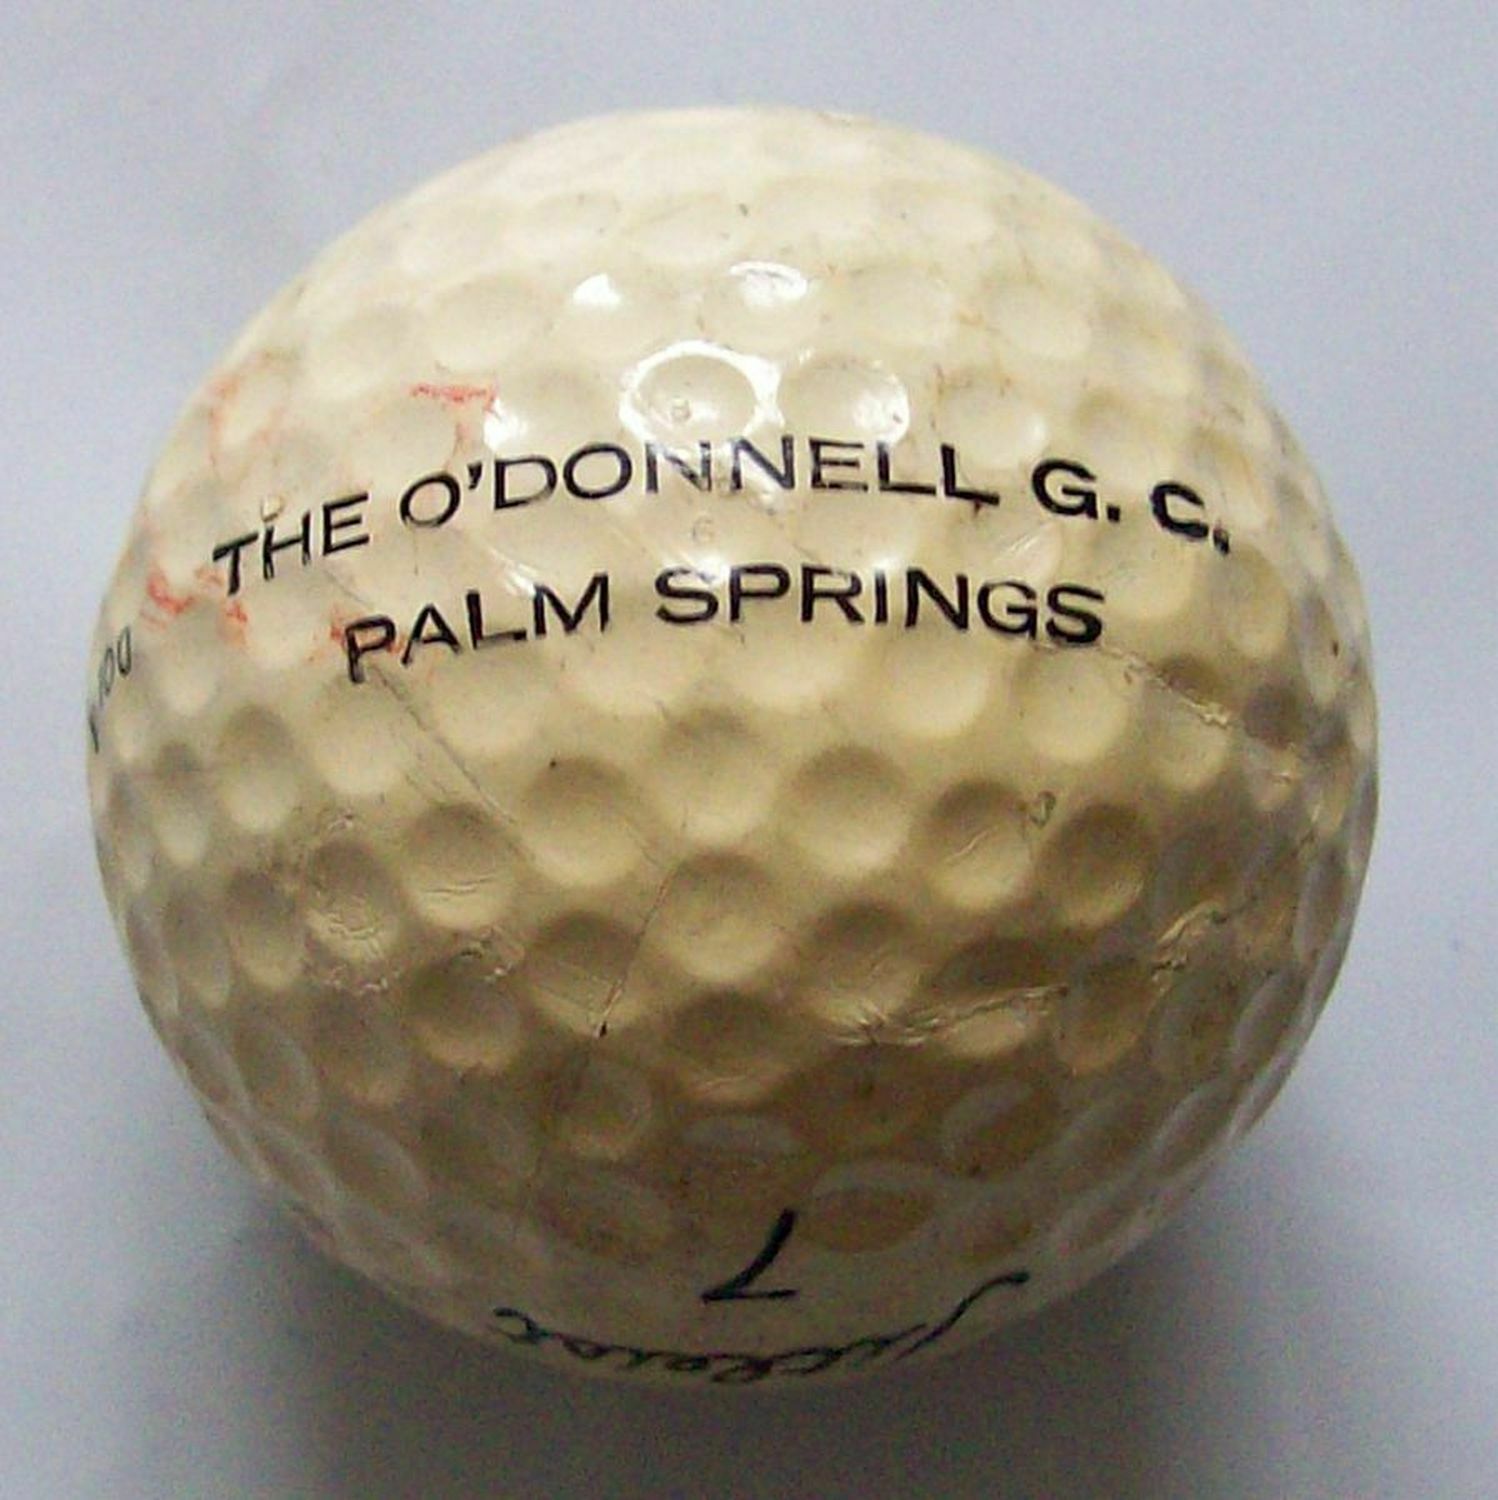 The O'Donnell Golf Club Palm Springs California one vintage Titleist golf ball